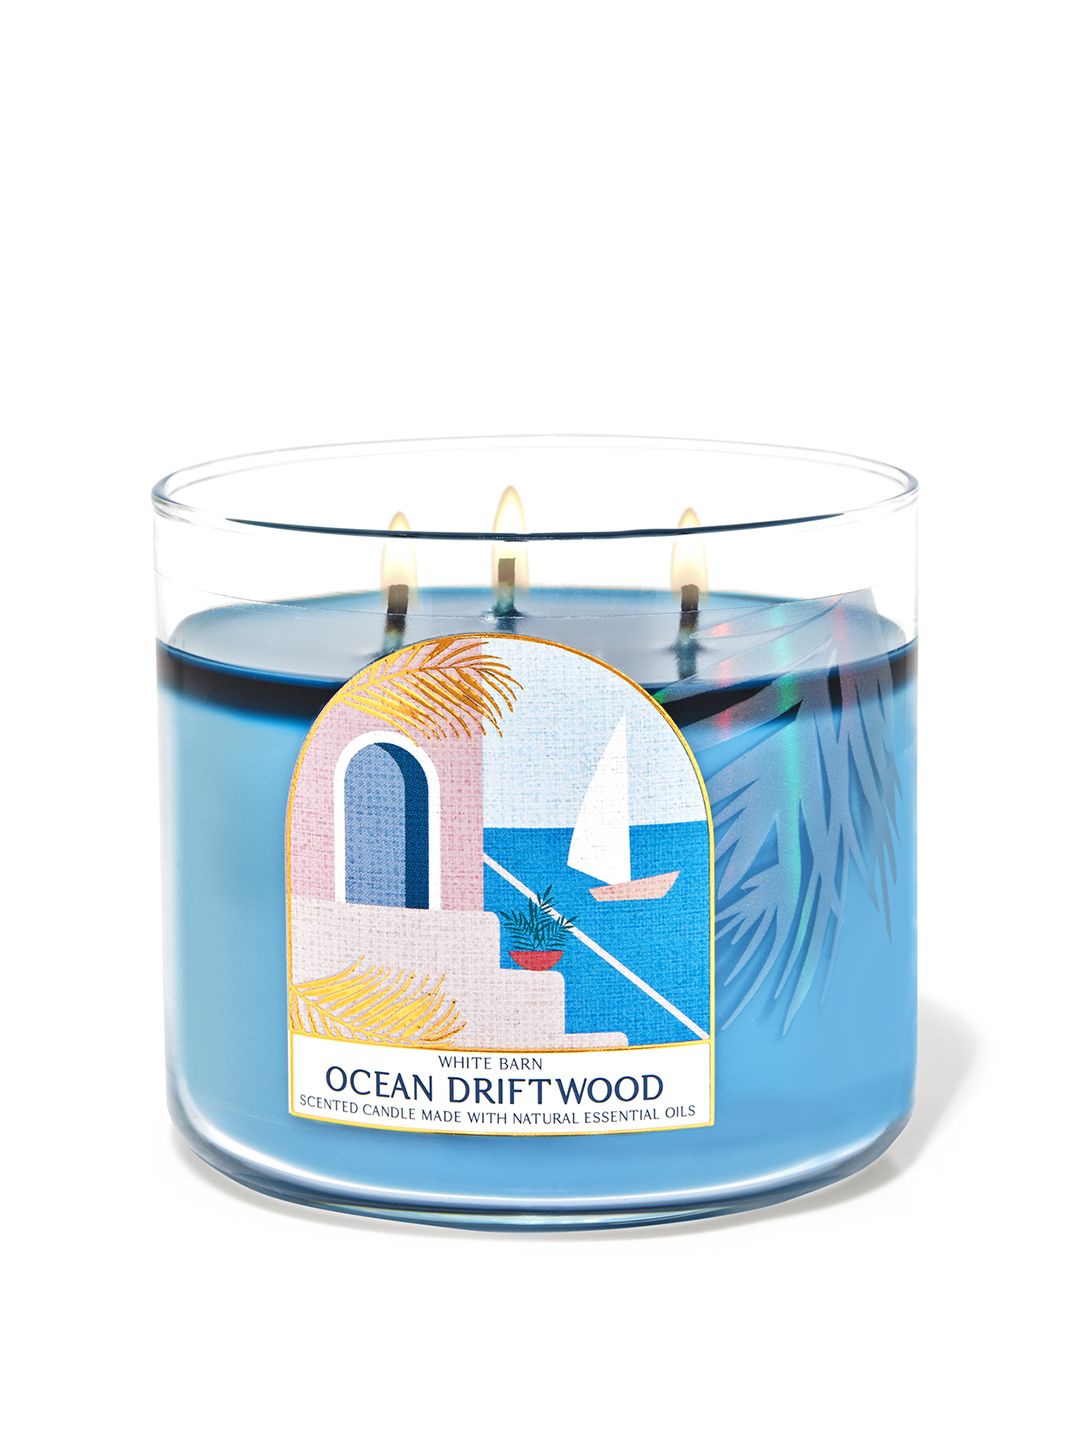 Bath & Body Works Ocean Driftwood 3-Wick Scented Candle with Essential Oils - 411g Price in India